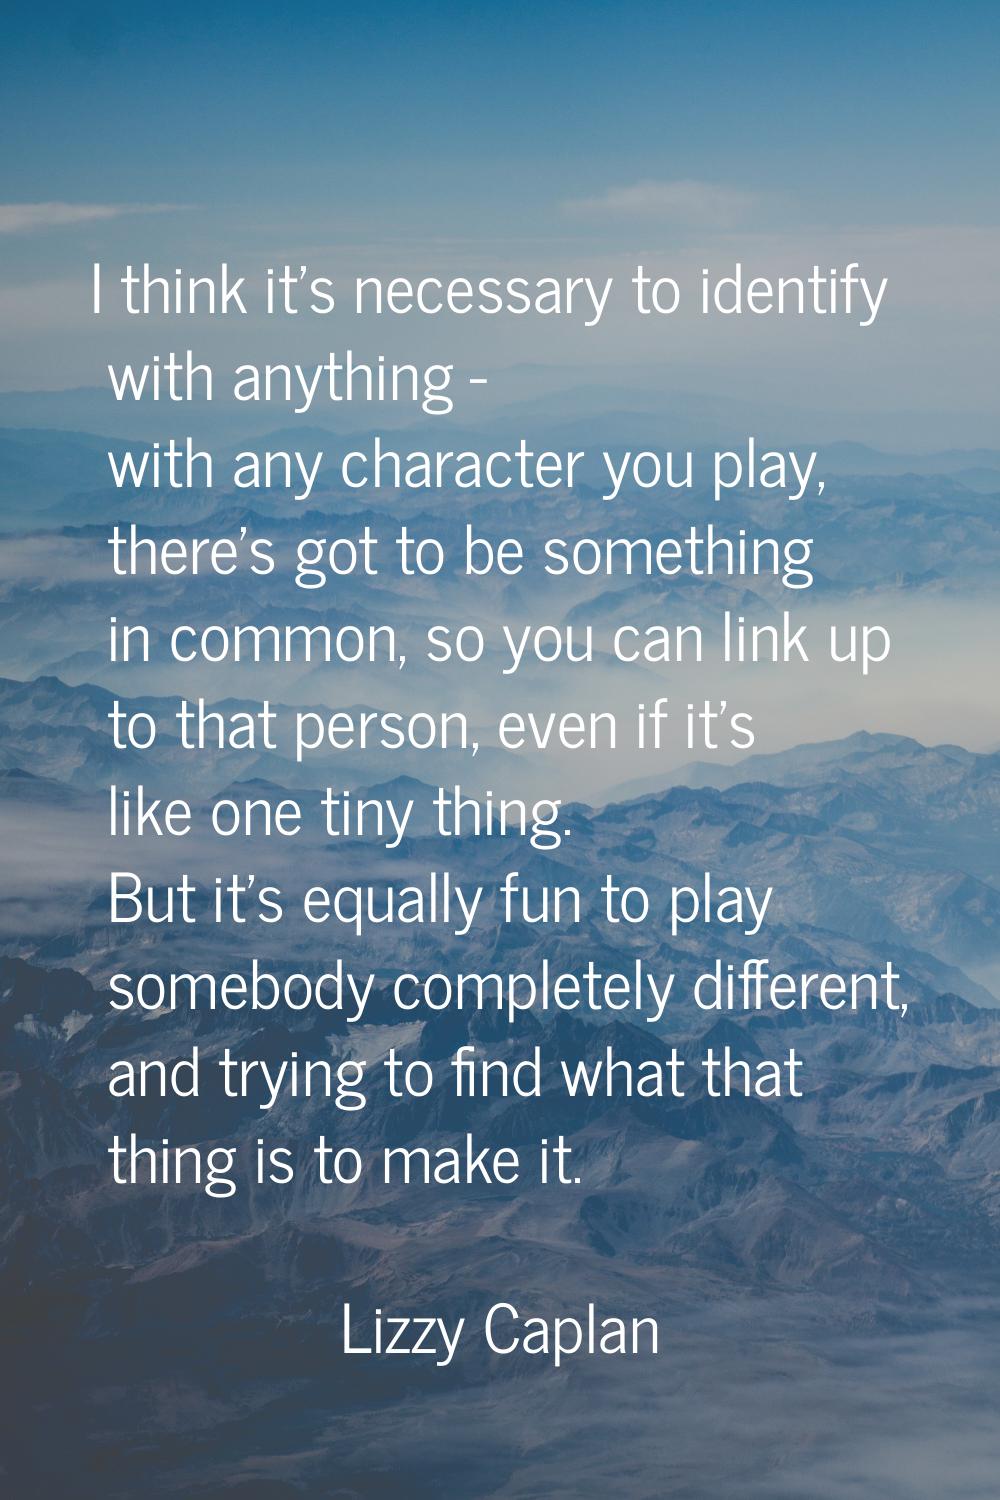 I think it's necessary to identify with anything - with any character you play, there's got to be s